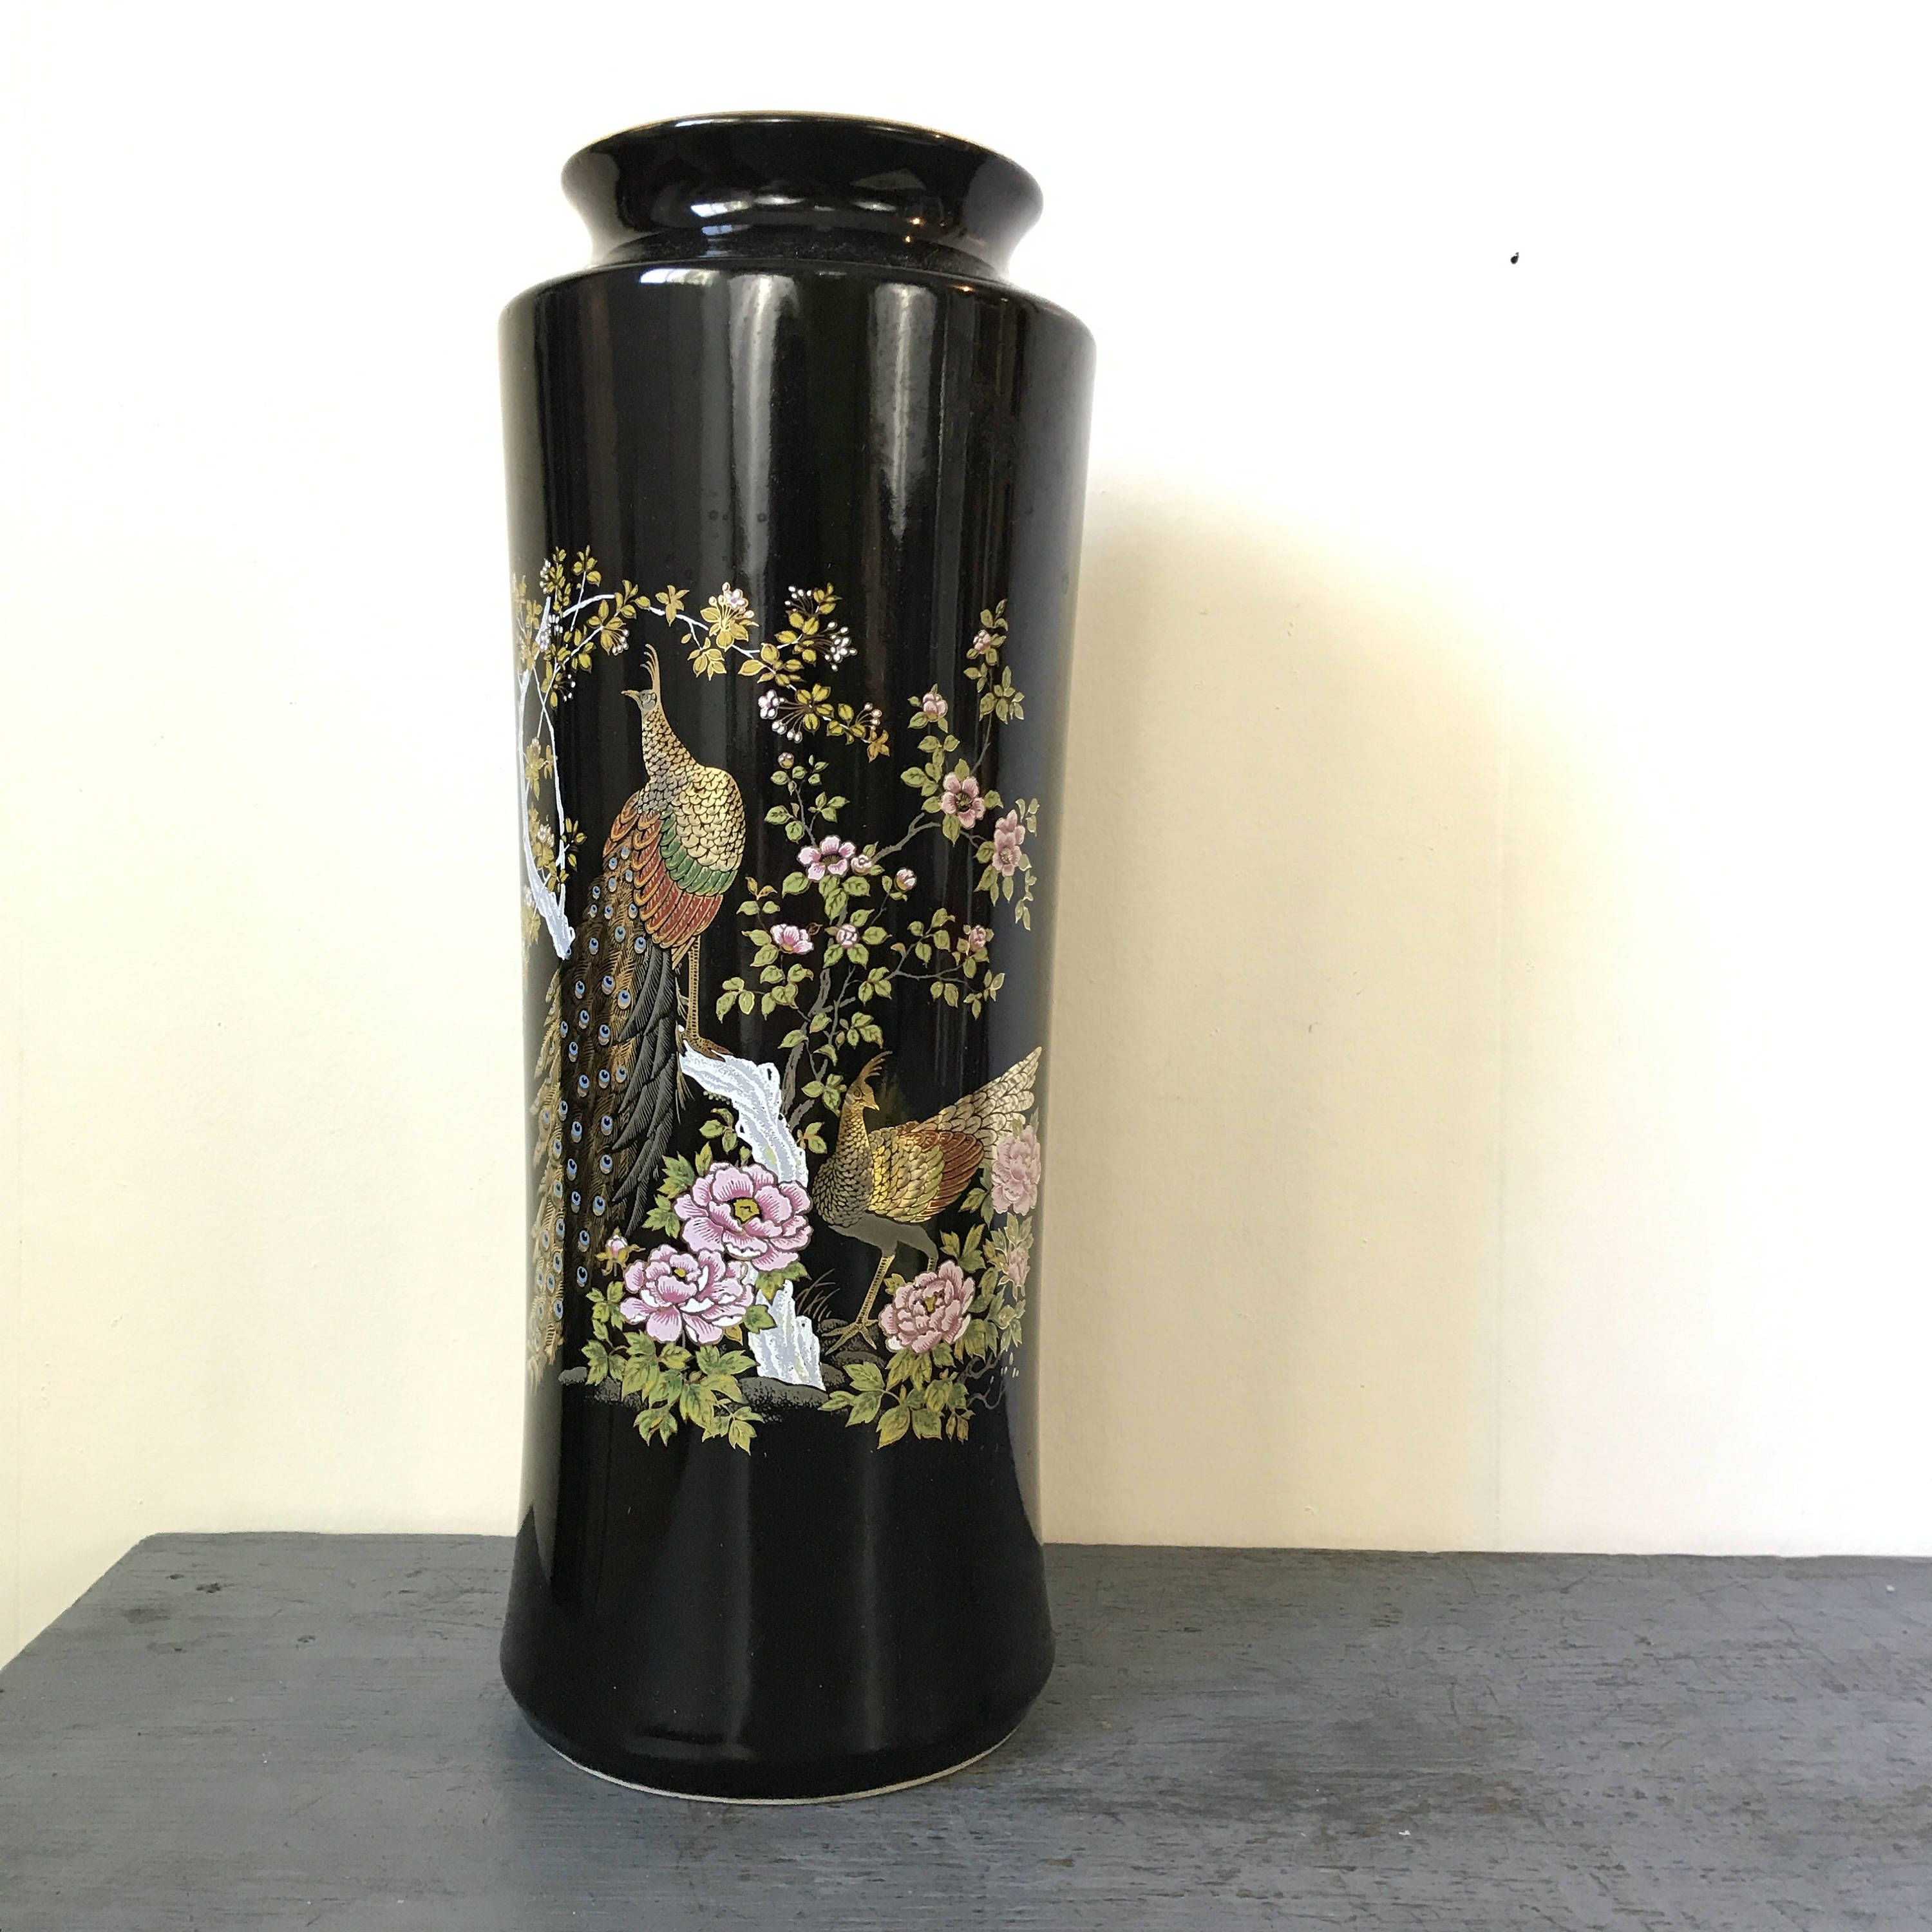 11 Perfect West Elm Flower Vase 2024 free download west elm flower vase of black ceramic vase stock west elm oversized pure white ceramic vases regarding black ceramic vase stock vintage ceramic vase japanese peacock floral asian chinoiserie